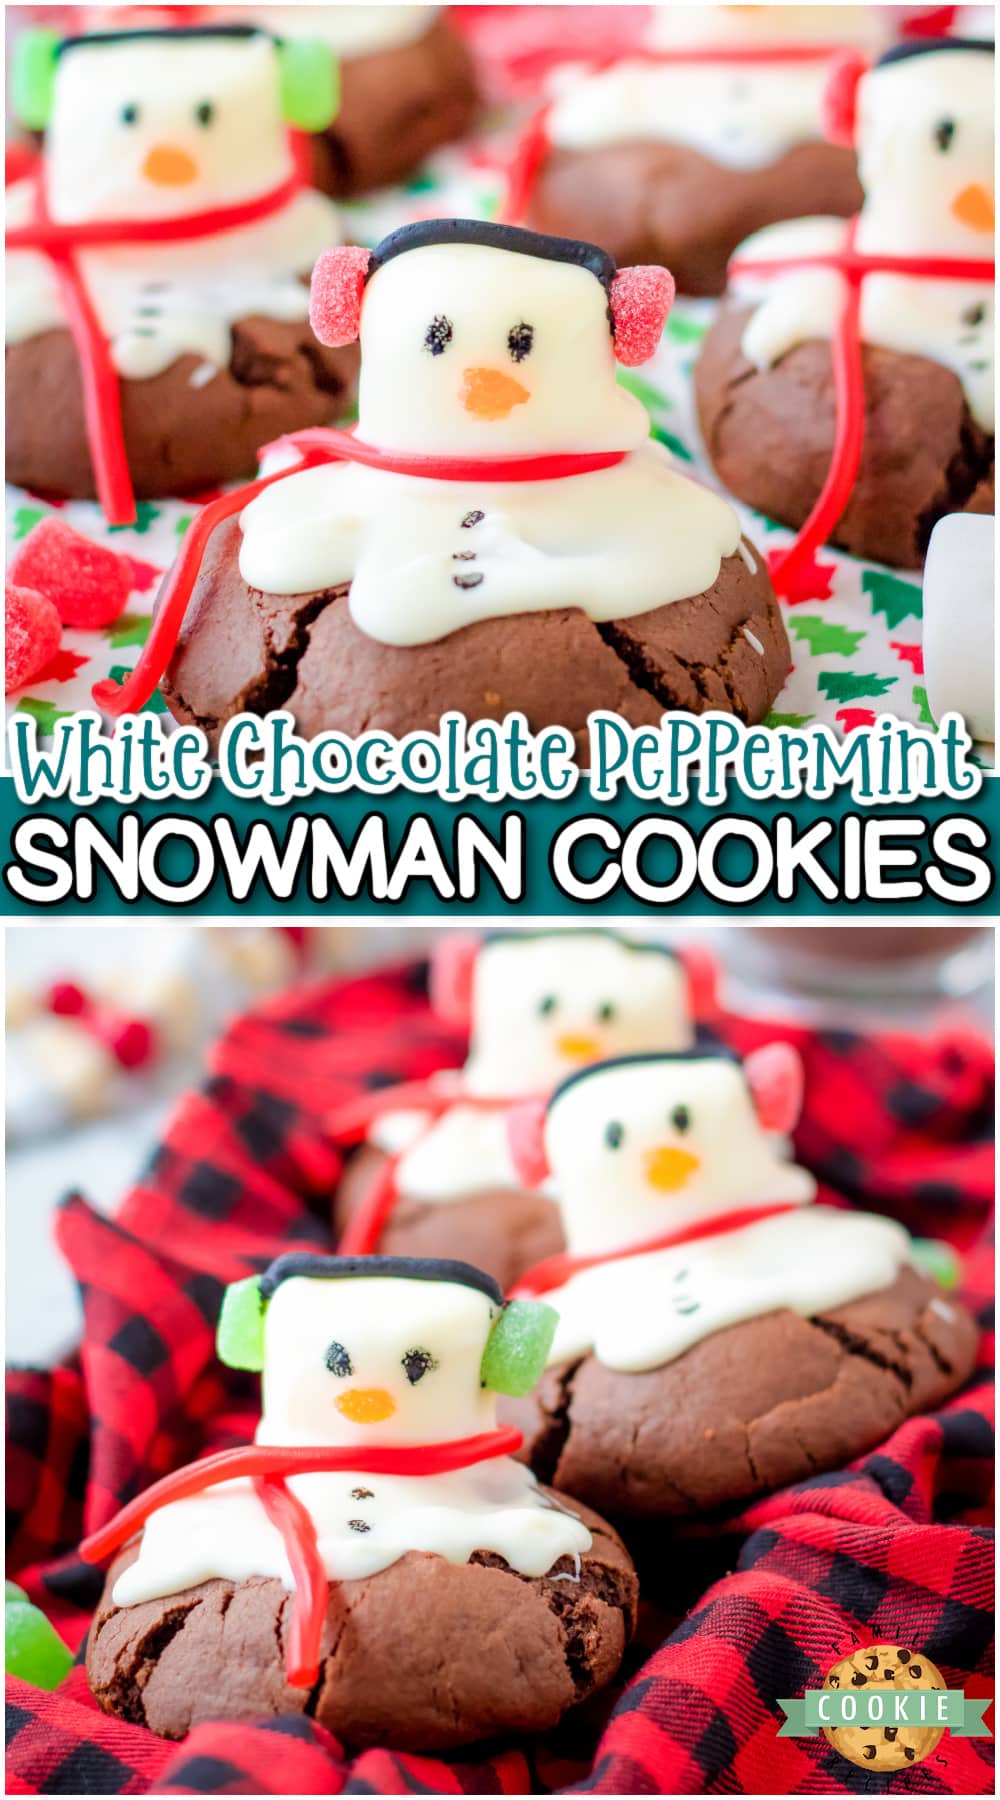 Peppermint snowman cookies are a festive wintery treat! Chocolate cookies stuffed with peppermint patties & decorated with a candy-covered snowman. These cookies are almost too cute to eat! via @buttergirls